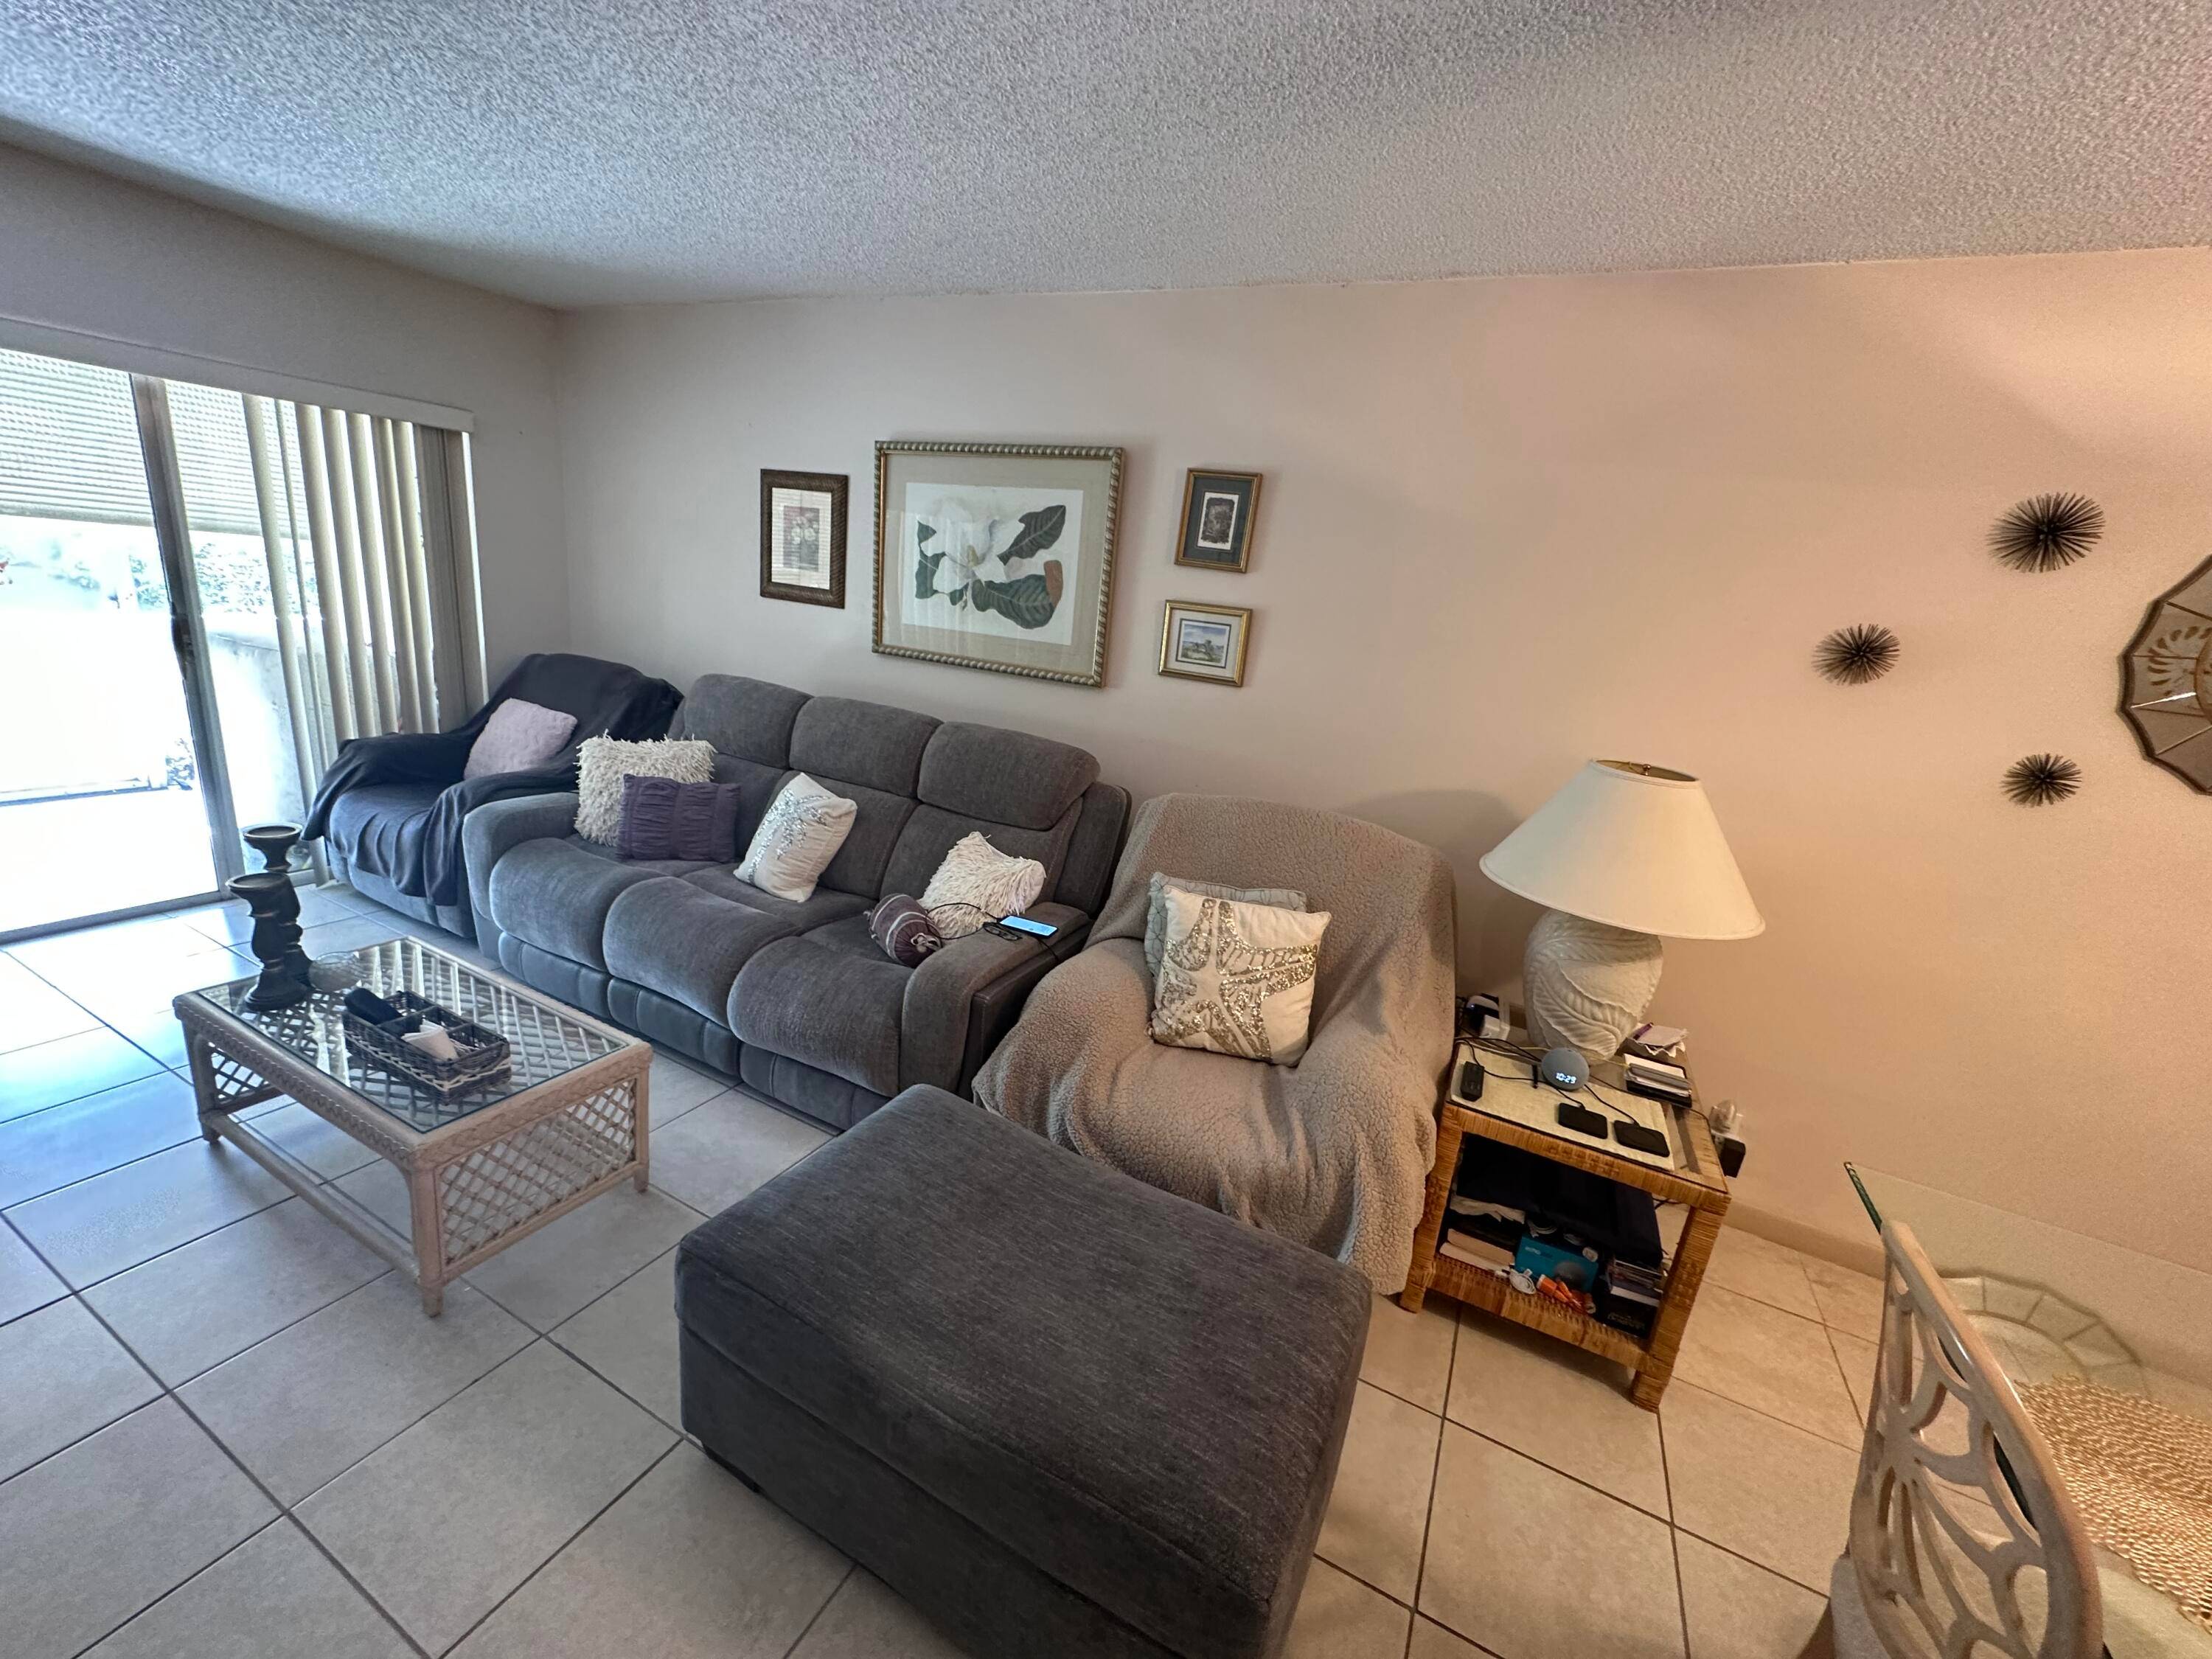 Welcome to this wonderful 2 bedroom, 2 bathroom condo in 55 plus Community.